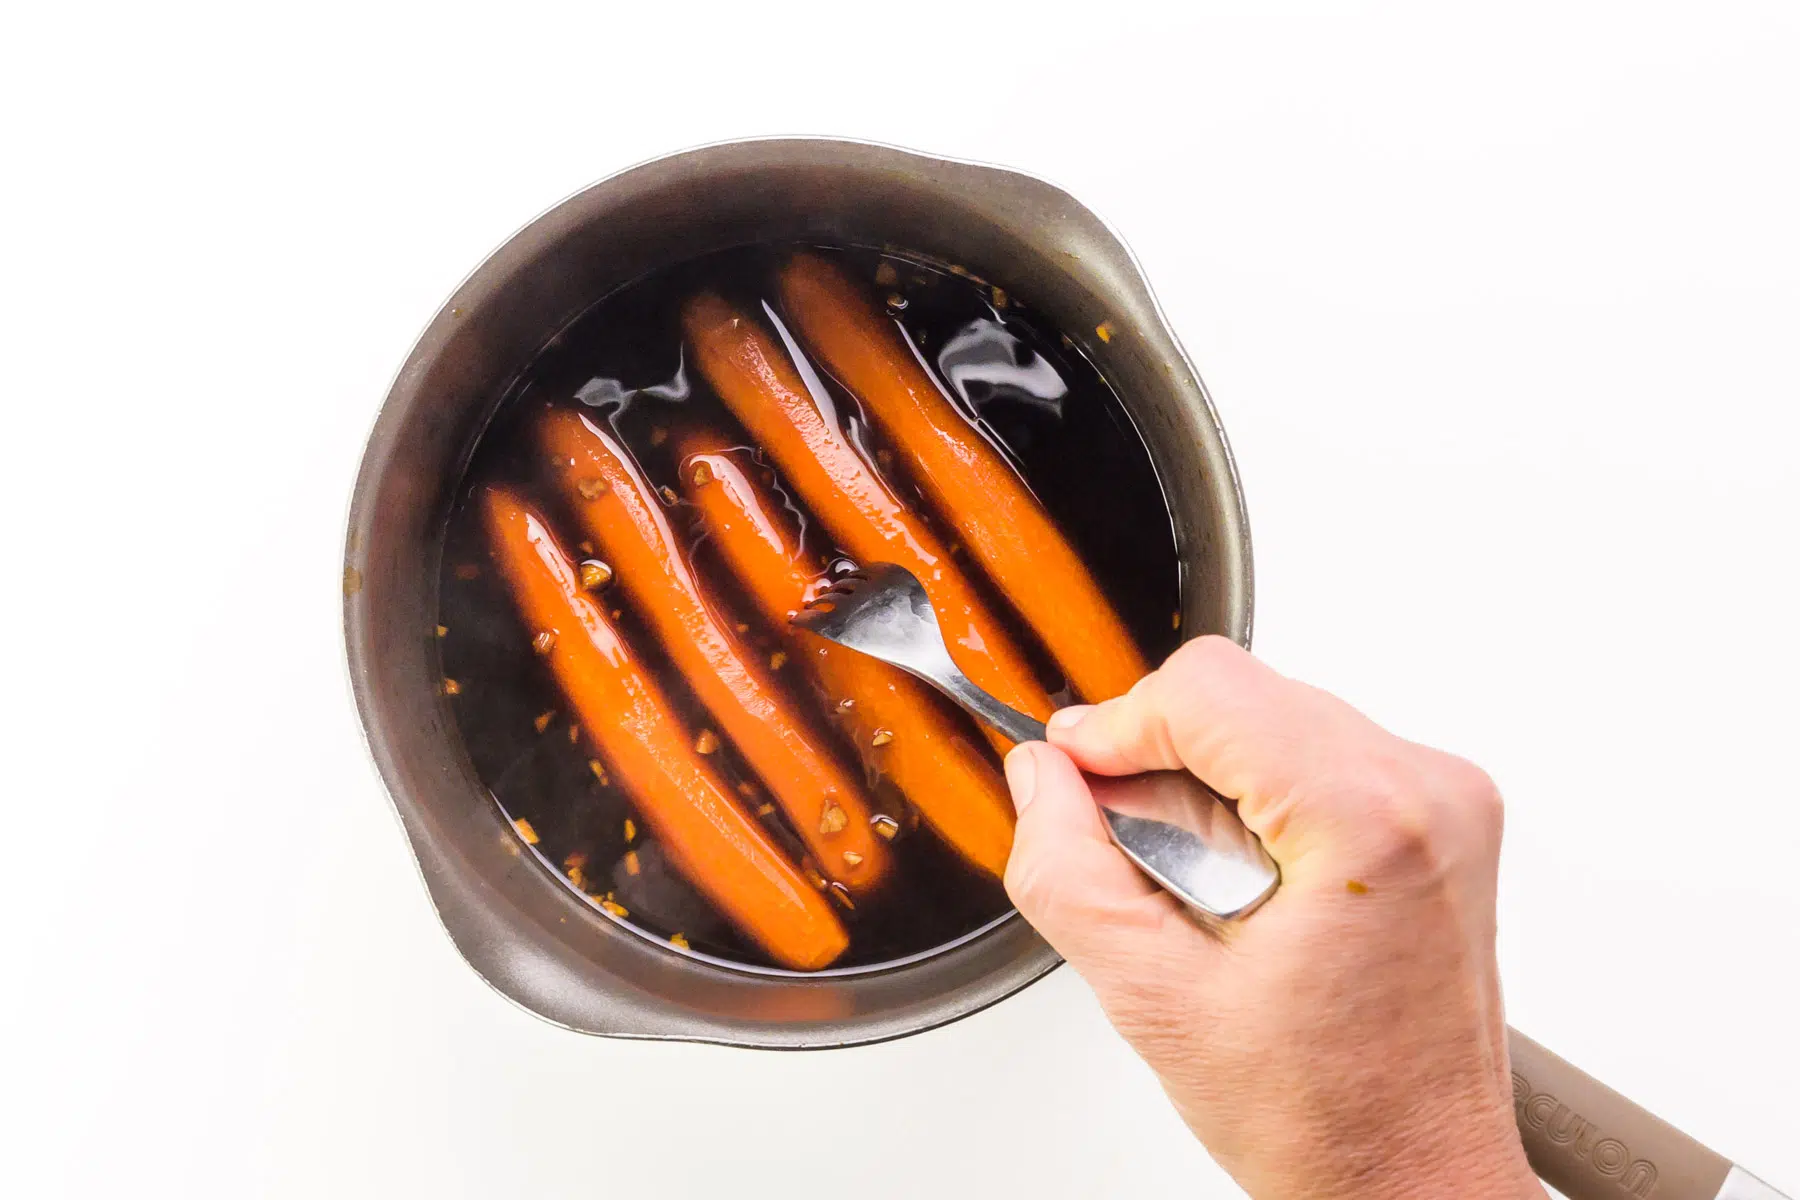 A handholds a fork, pushing it into carrots in a saucepan, testing for doneness.